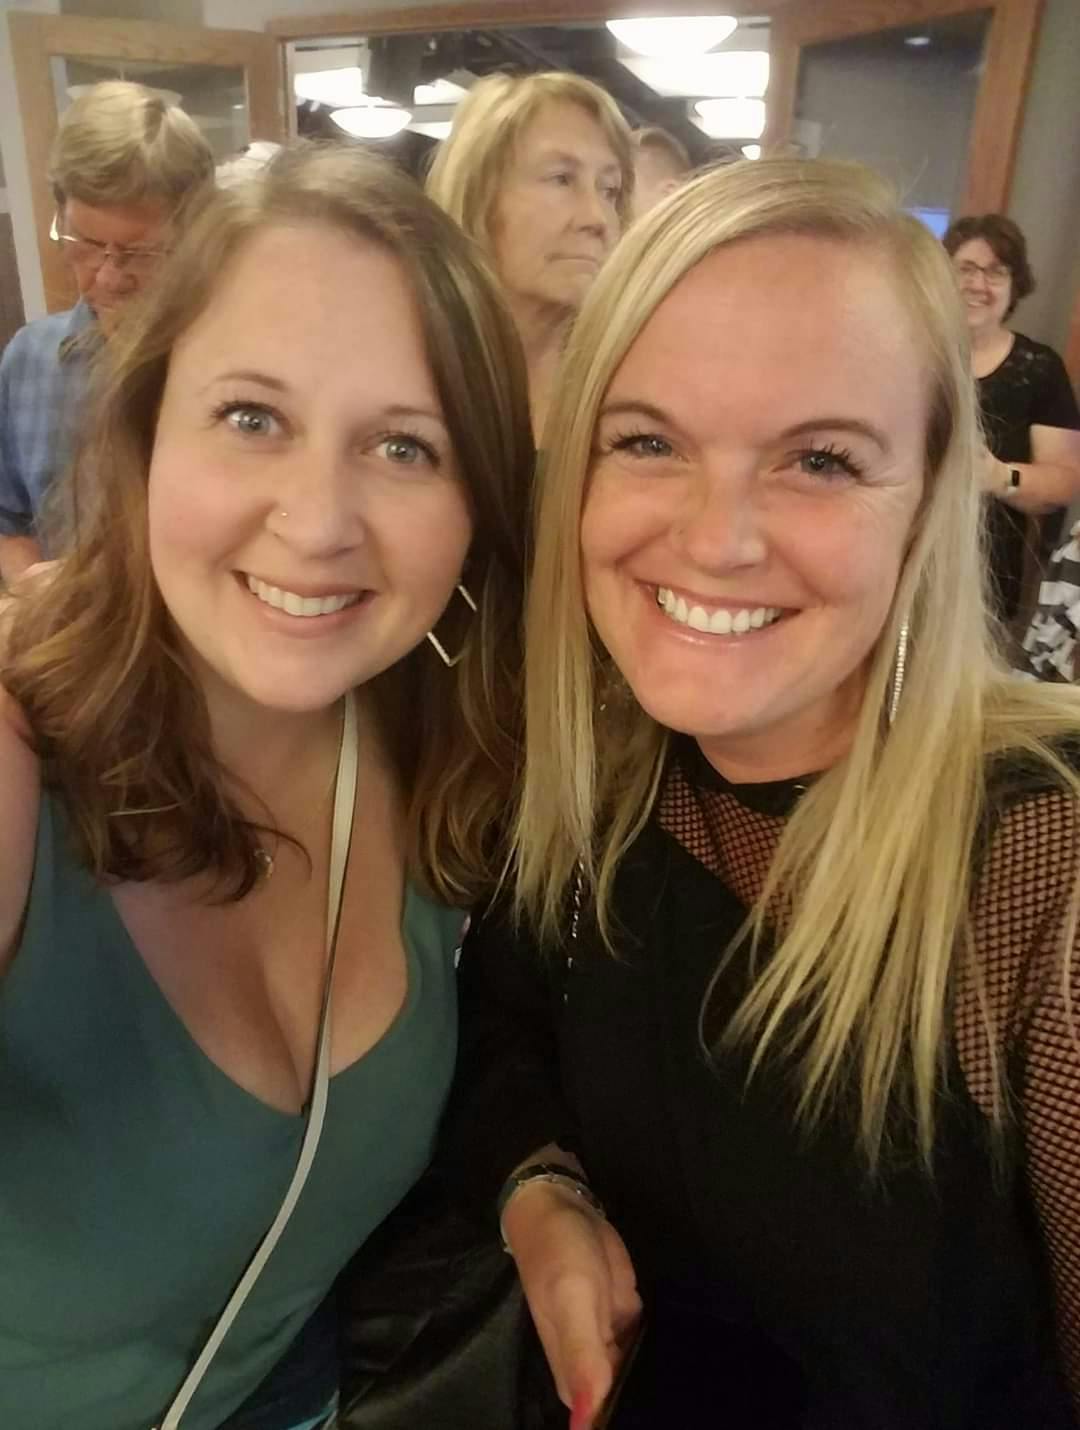 a couple of women smiling